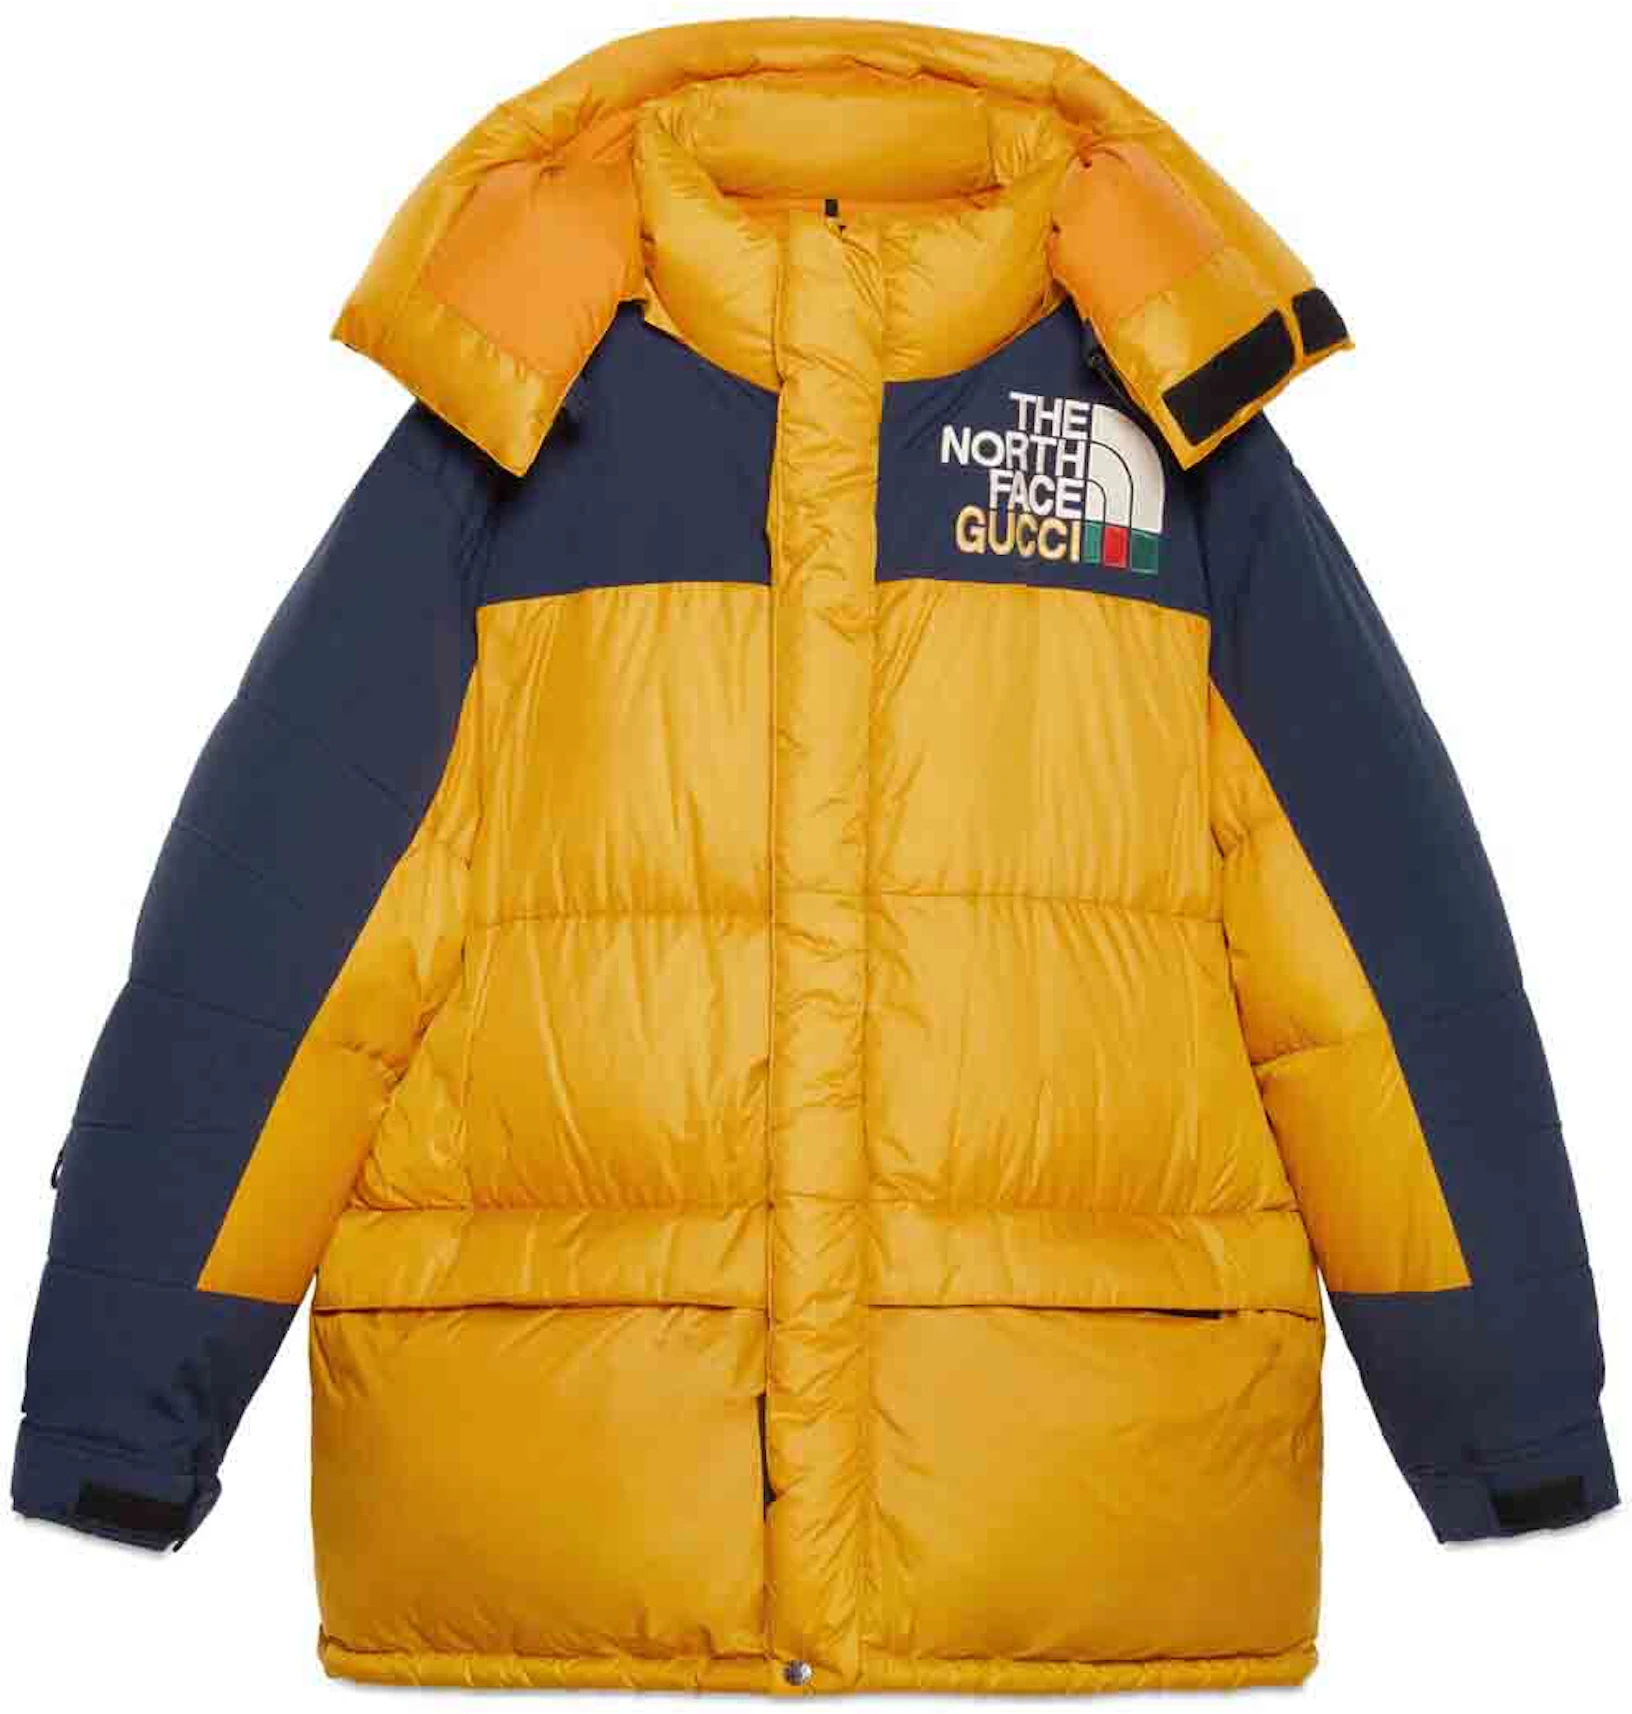 Gucci x The North Face Down Coat Black/Yellow - FW21 - US